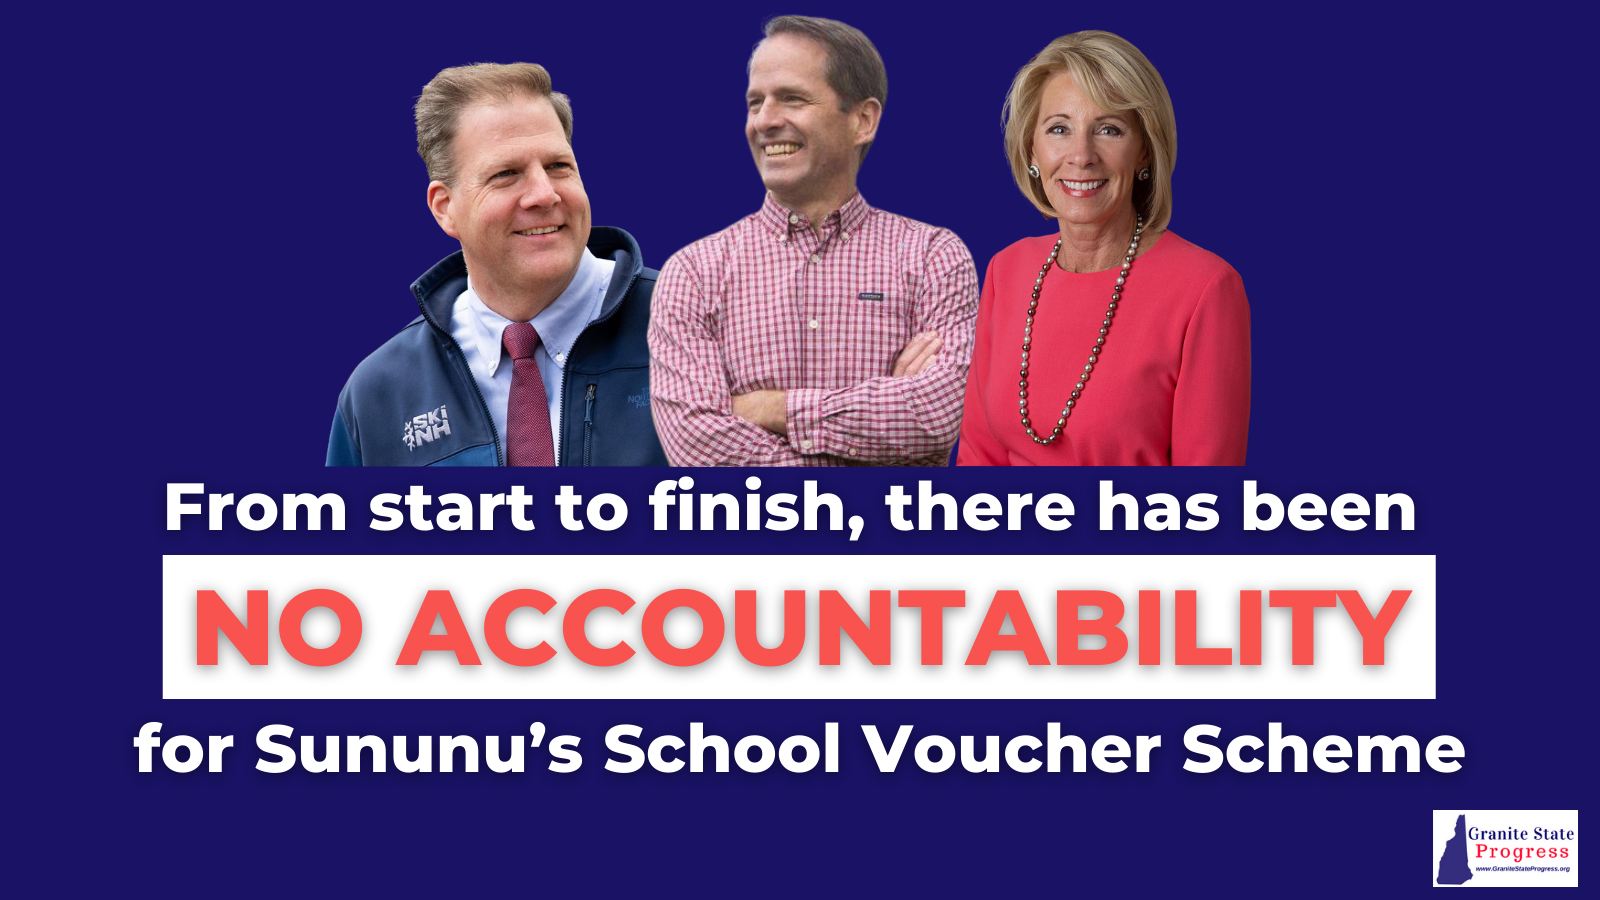 Image: Chris Sununu, Frank Edelblut, and Betsy DeVos profiles; Text: From start to finish, there has been no accountability for Sununu's school voucher scheme